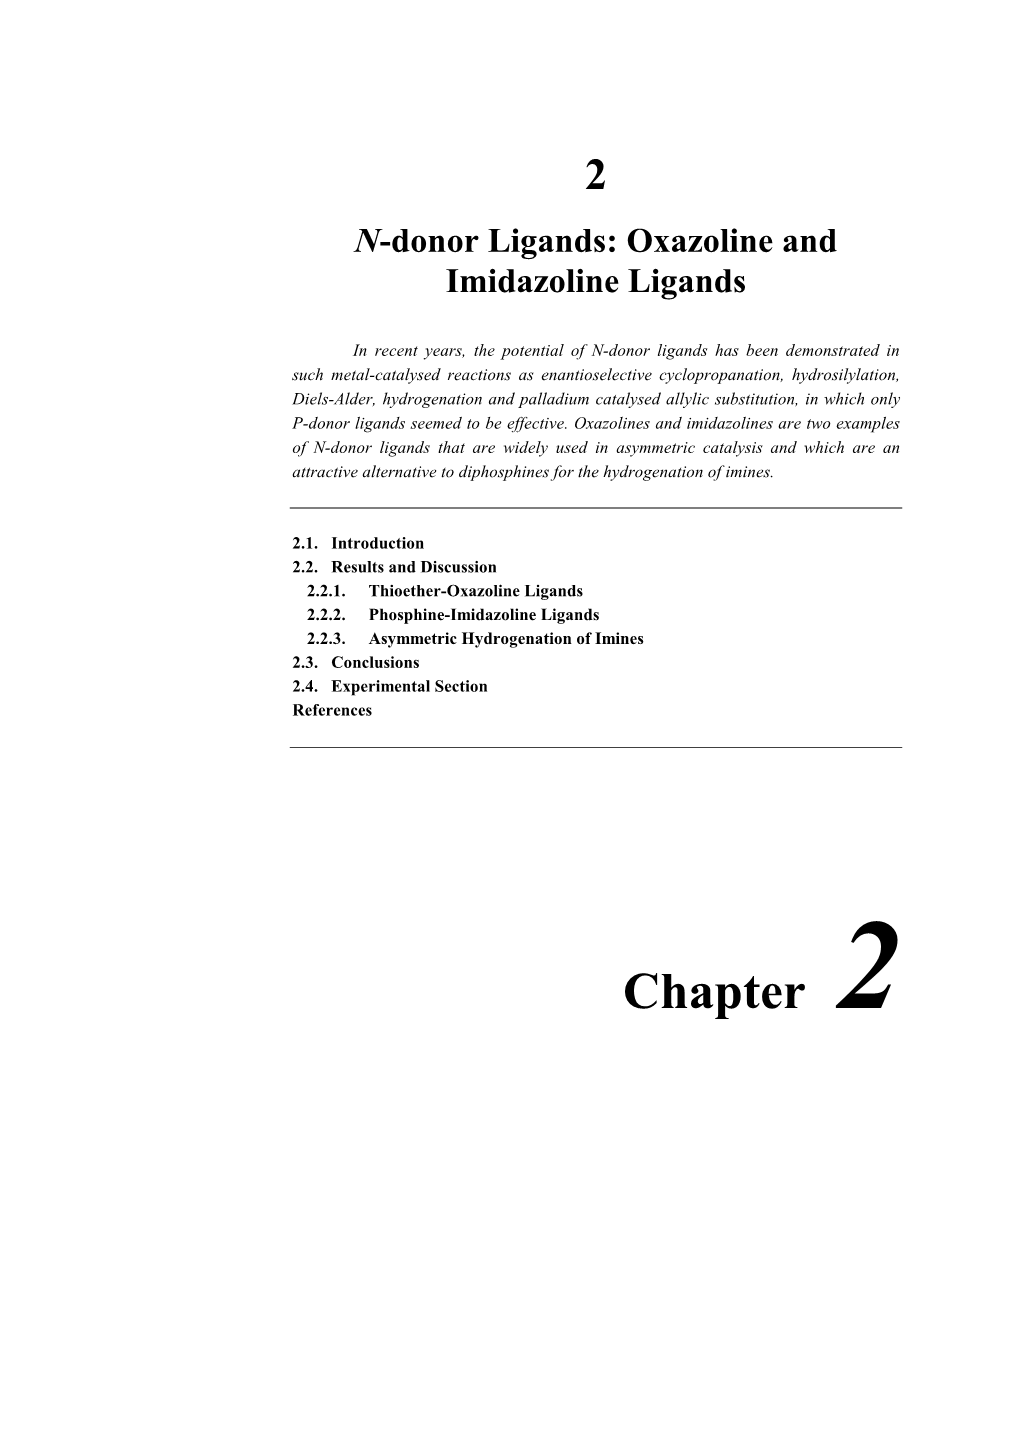 1,3-Oxazoline (6) [22A] Ligand 6 Was Obtained by Following the General Procedure O Described Above